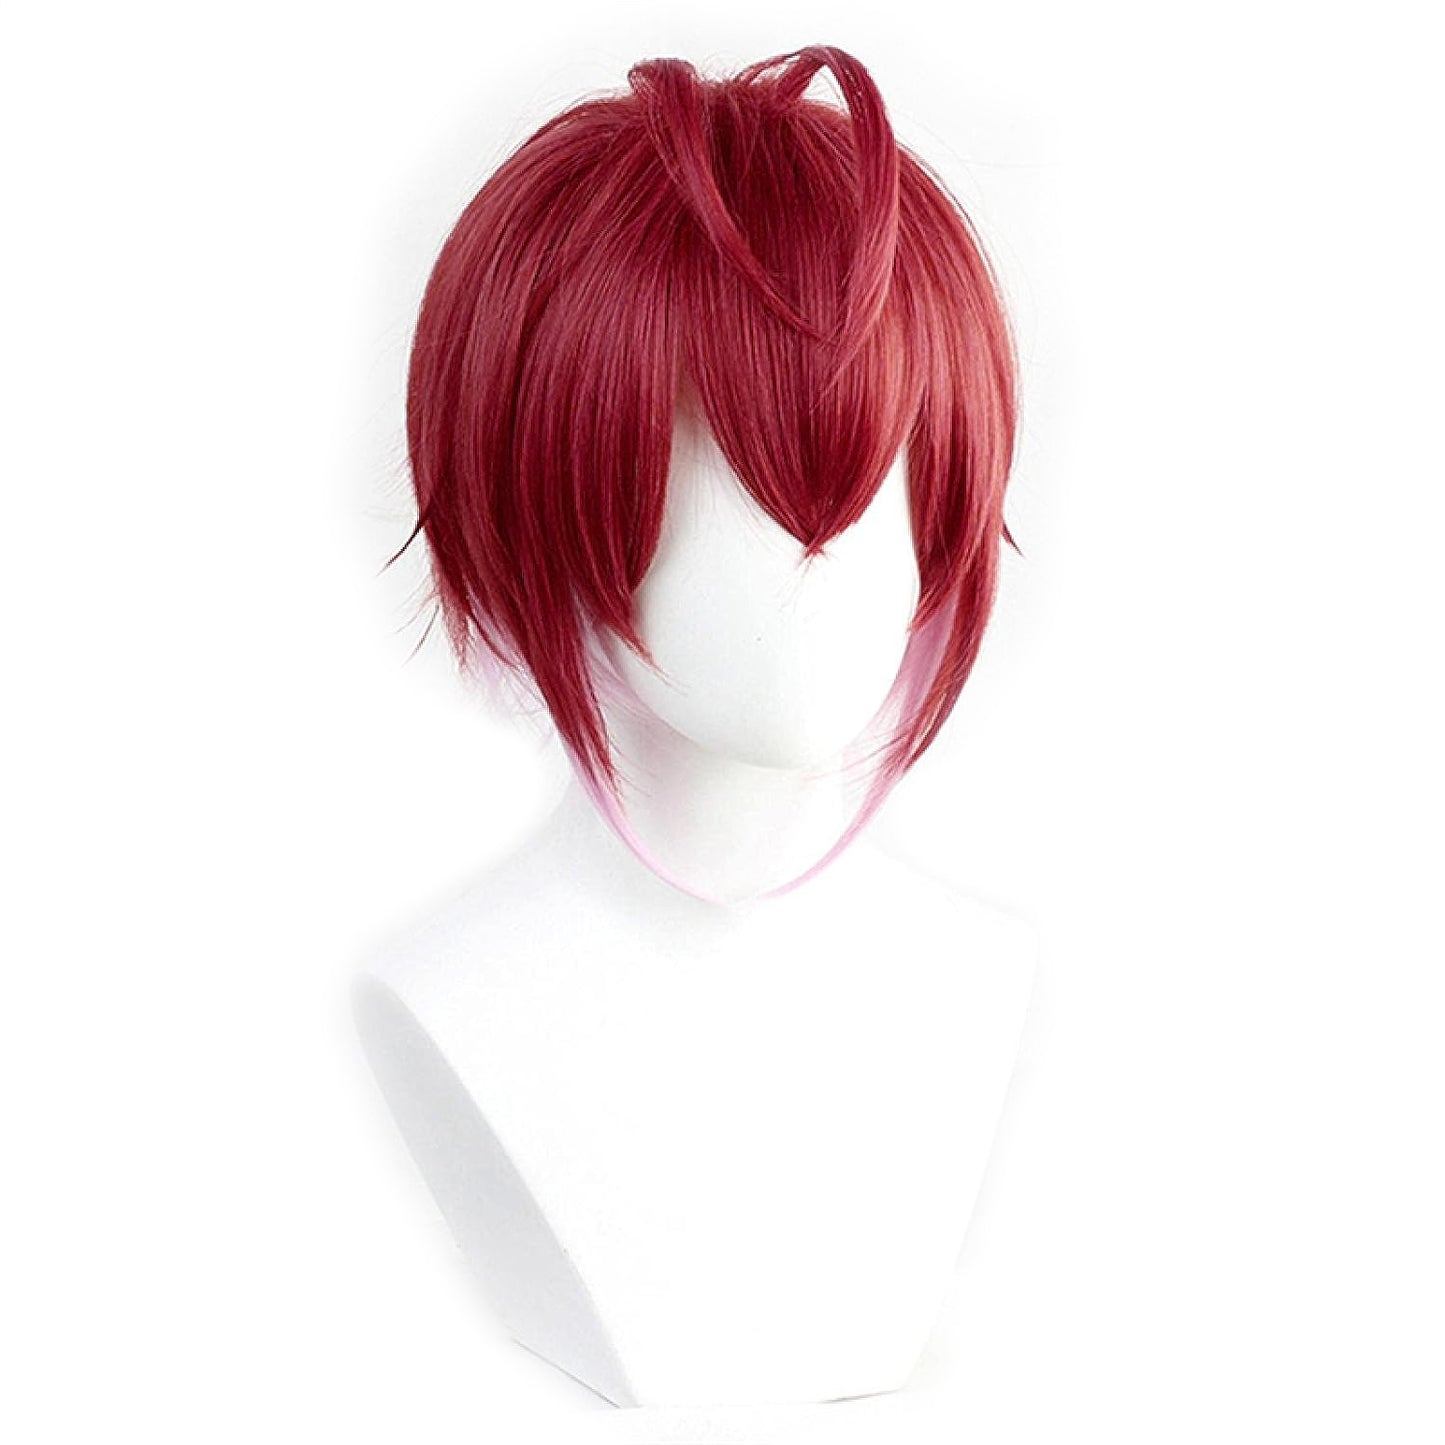 Rule the Heartslabyul Dormitory with our Riddle Rosehearts Cosplay Wig